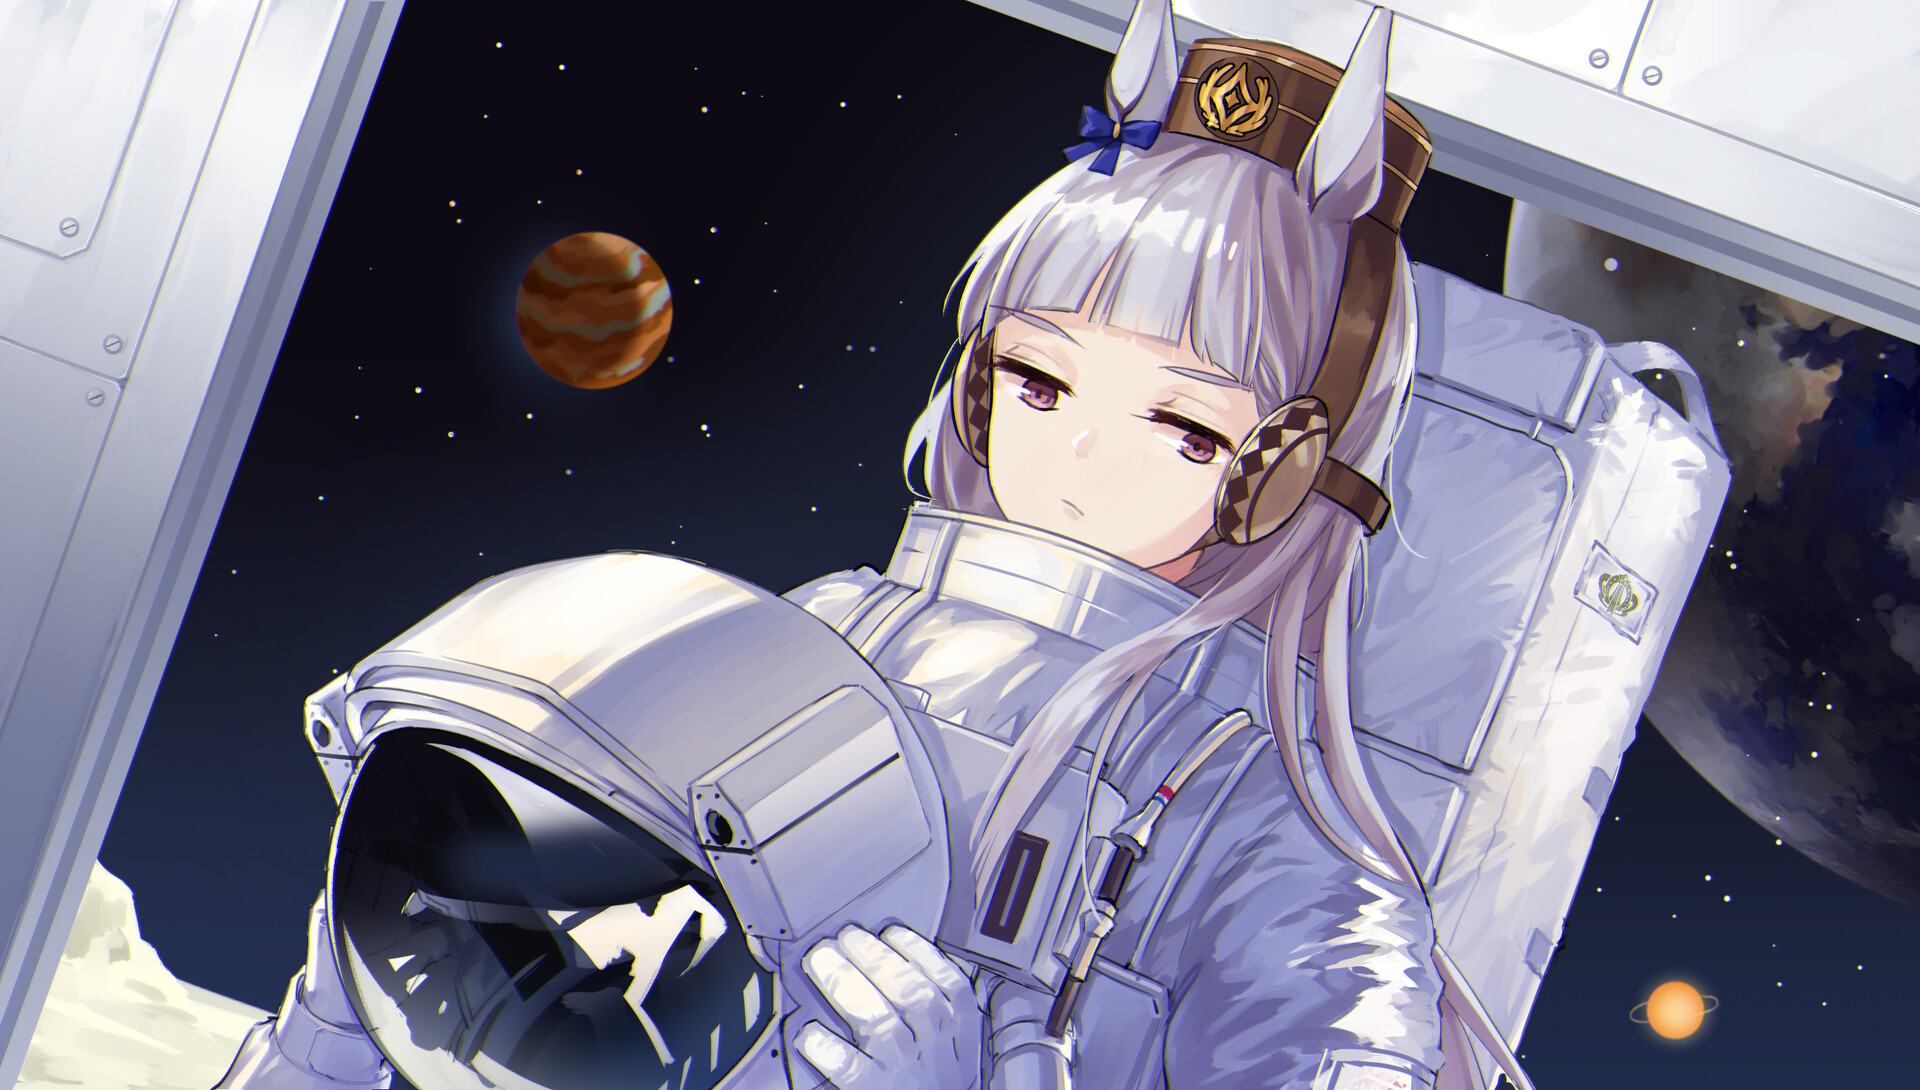 Anime Girls Astronaut Spacesuit Wallpaper Resolution1920x1090 ID